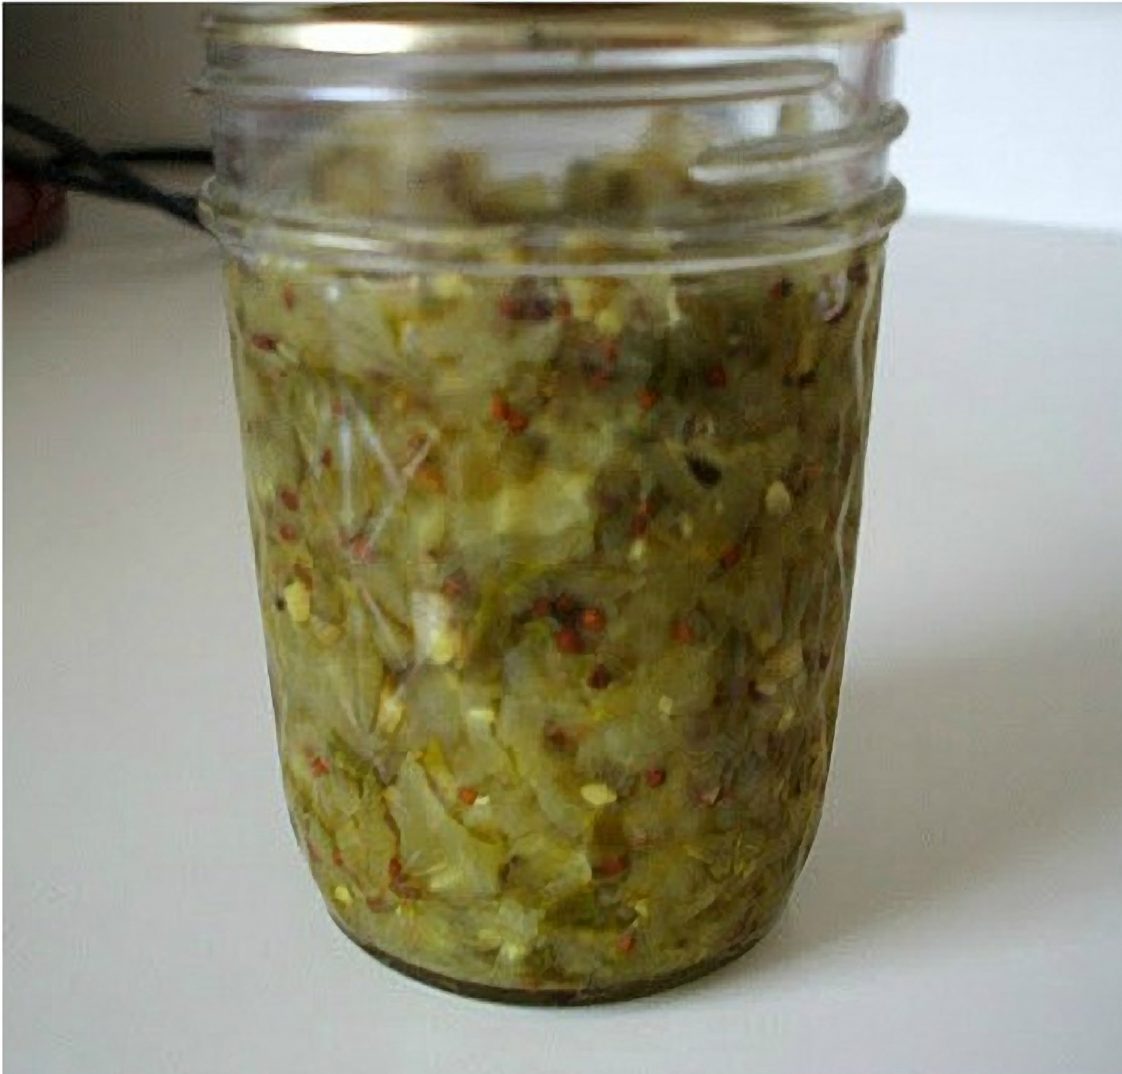 Dill Relish Canning Recipe – Home Life Weekly